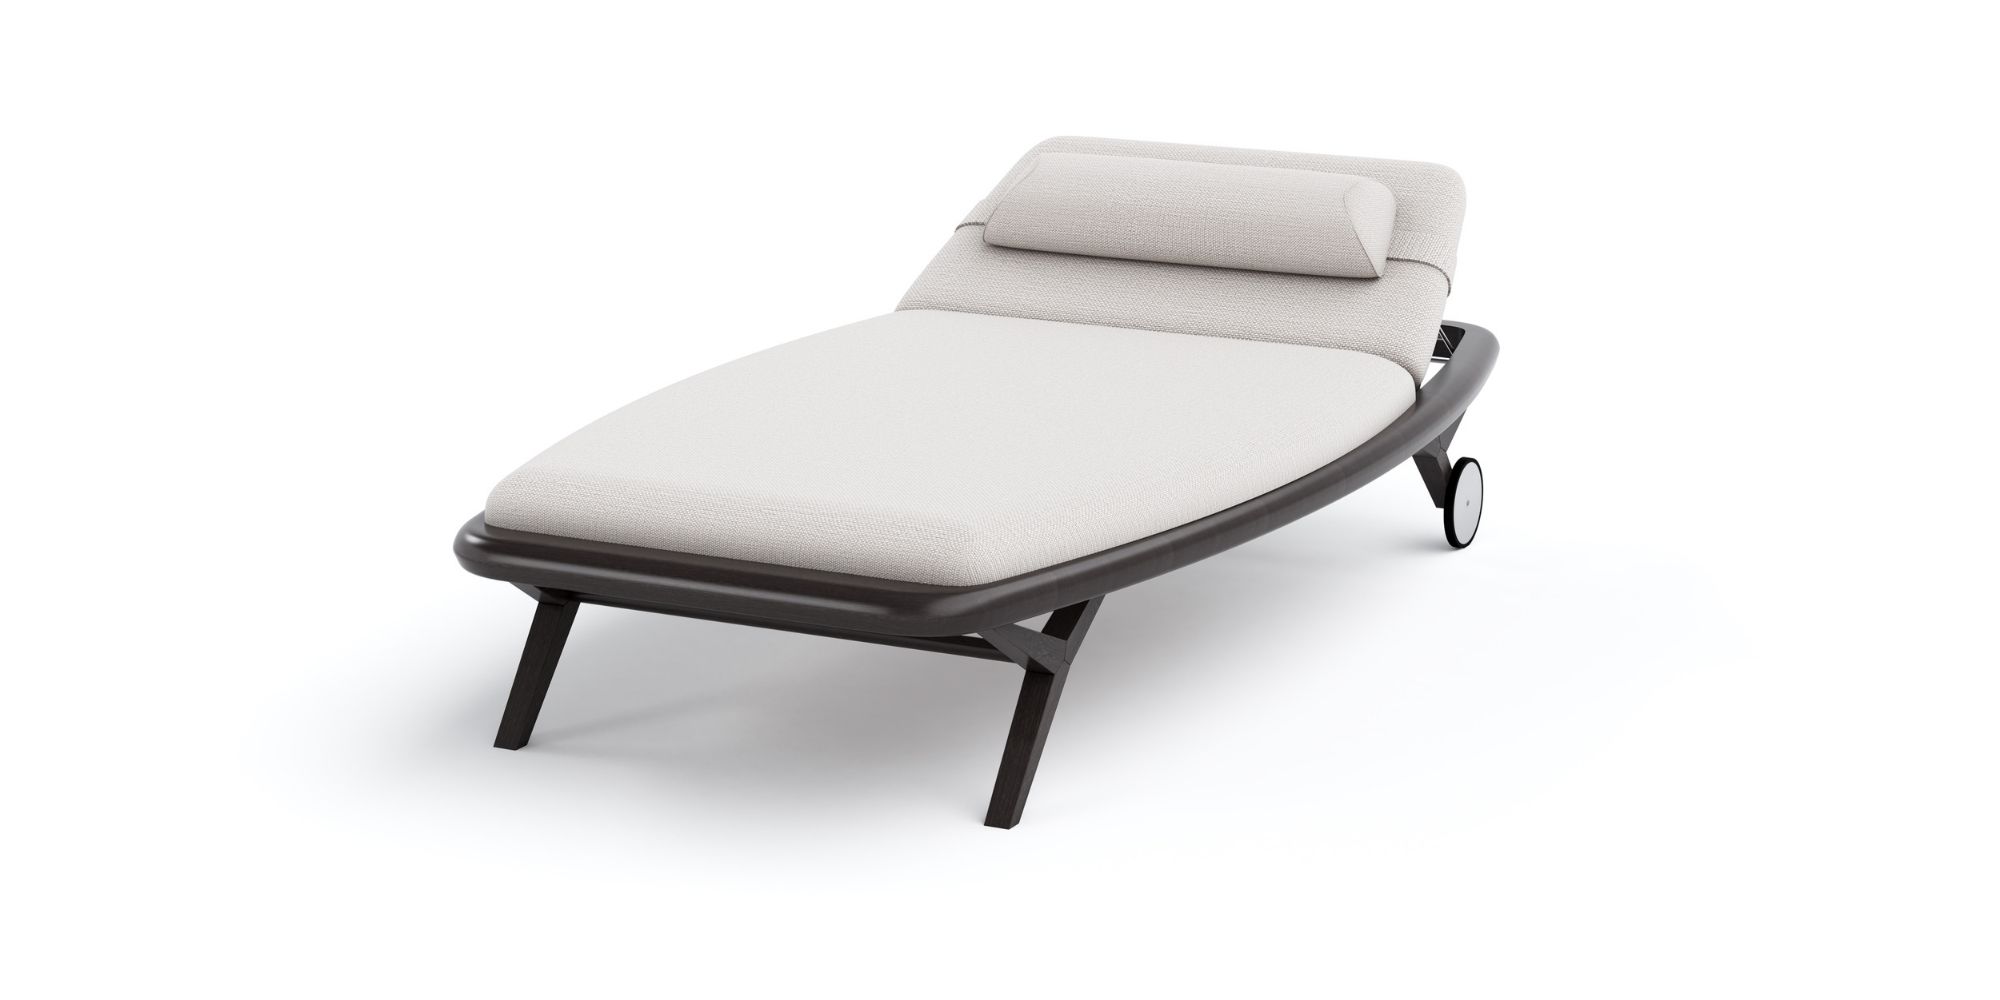 Chuchumber Lounger Duo in Outdoor Loungers for Chuchumber collection